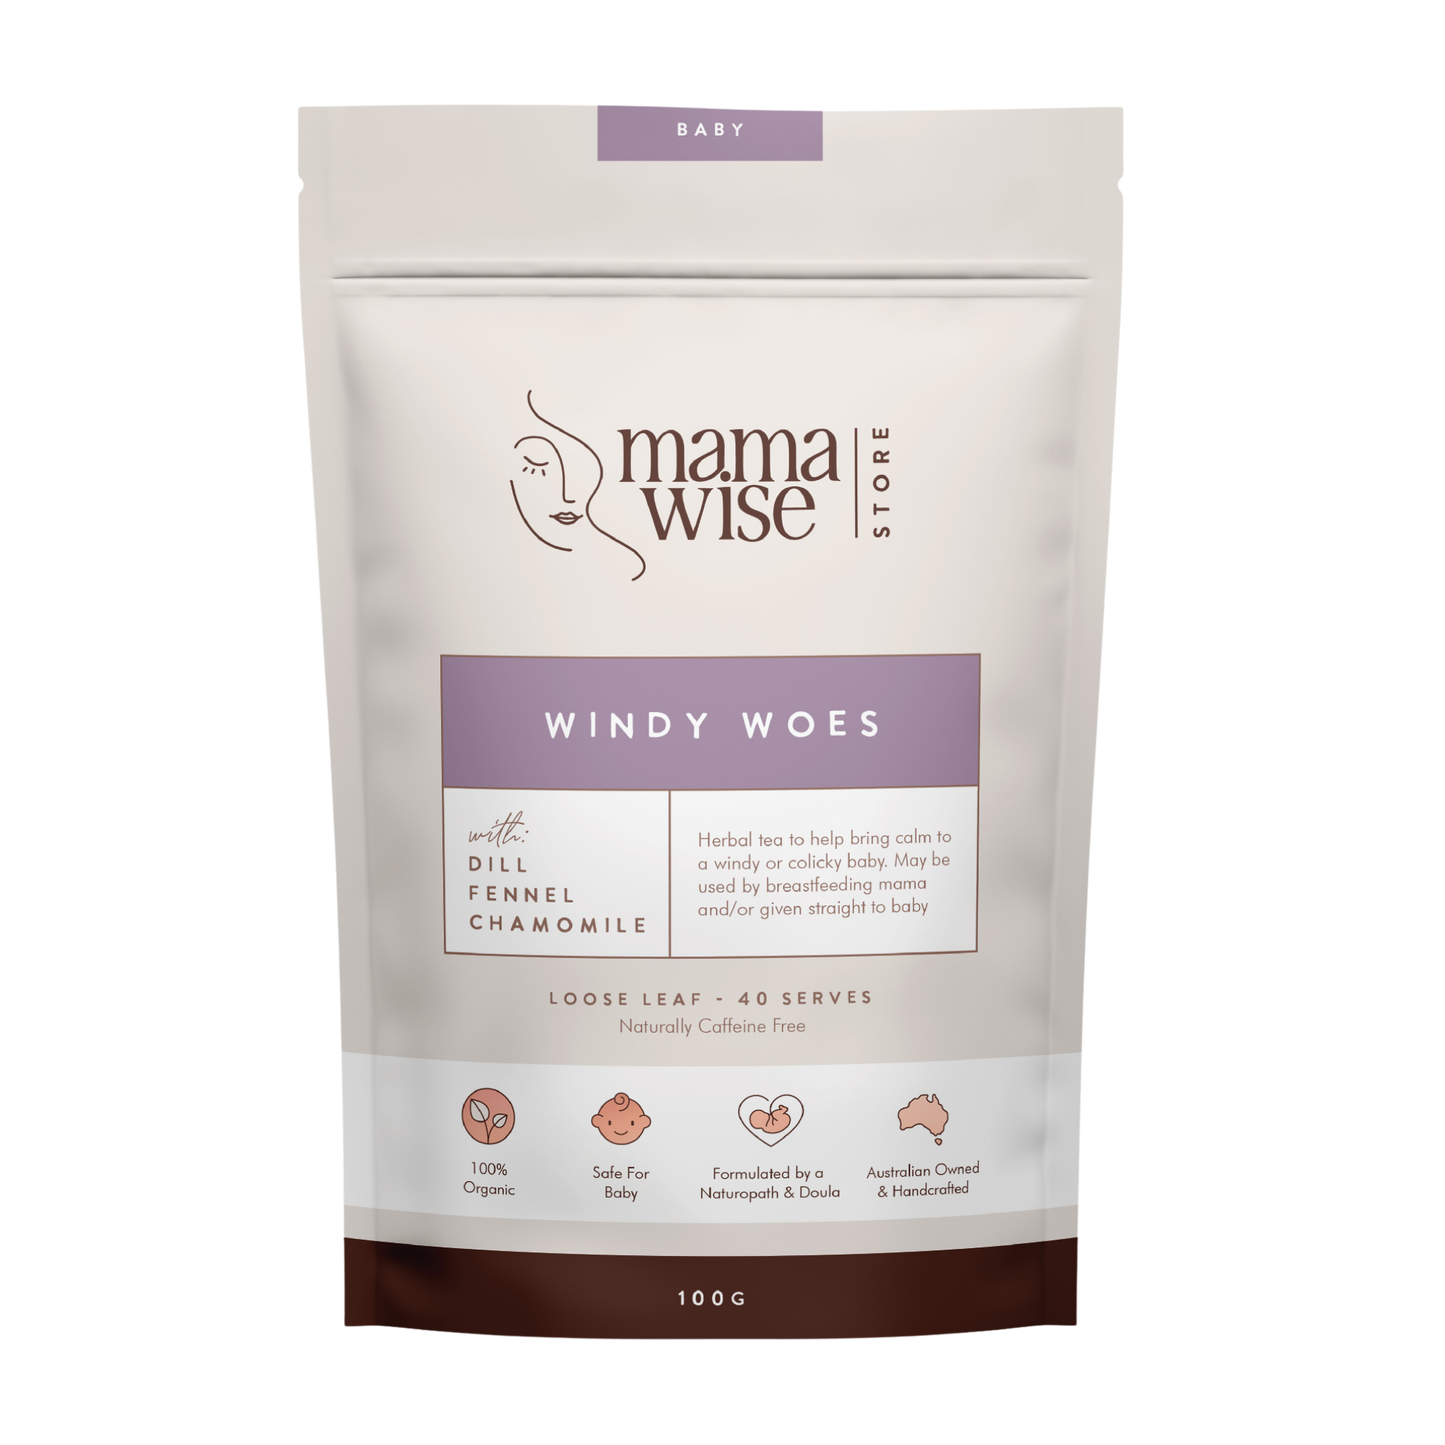 Mamawise Windy Woes Herbal Tea 100gm pack, used by breastfeeding mothers to ease colic or windy in baby 